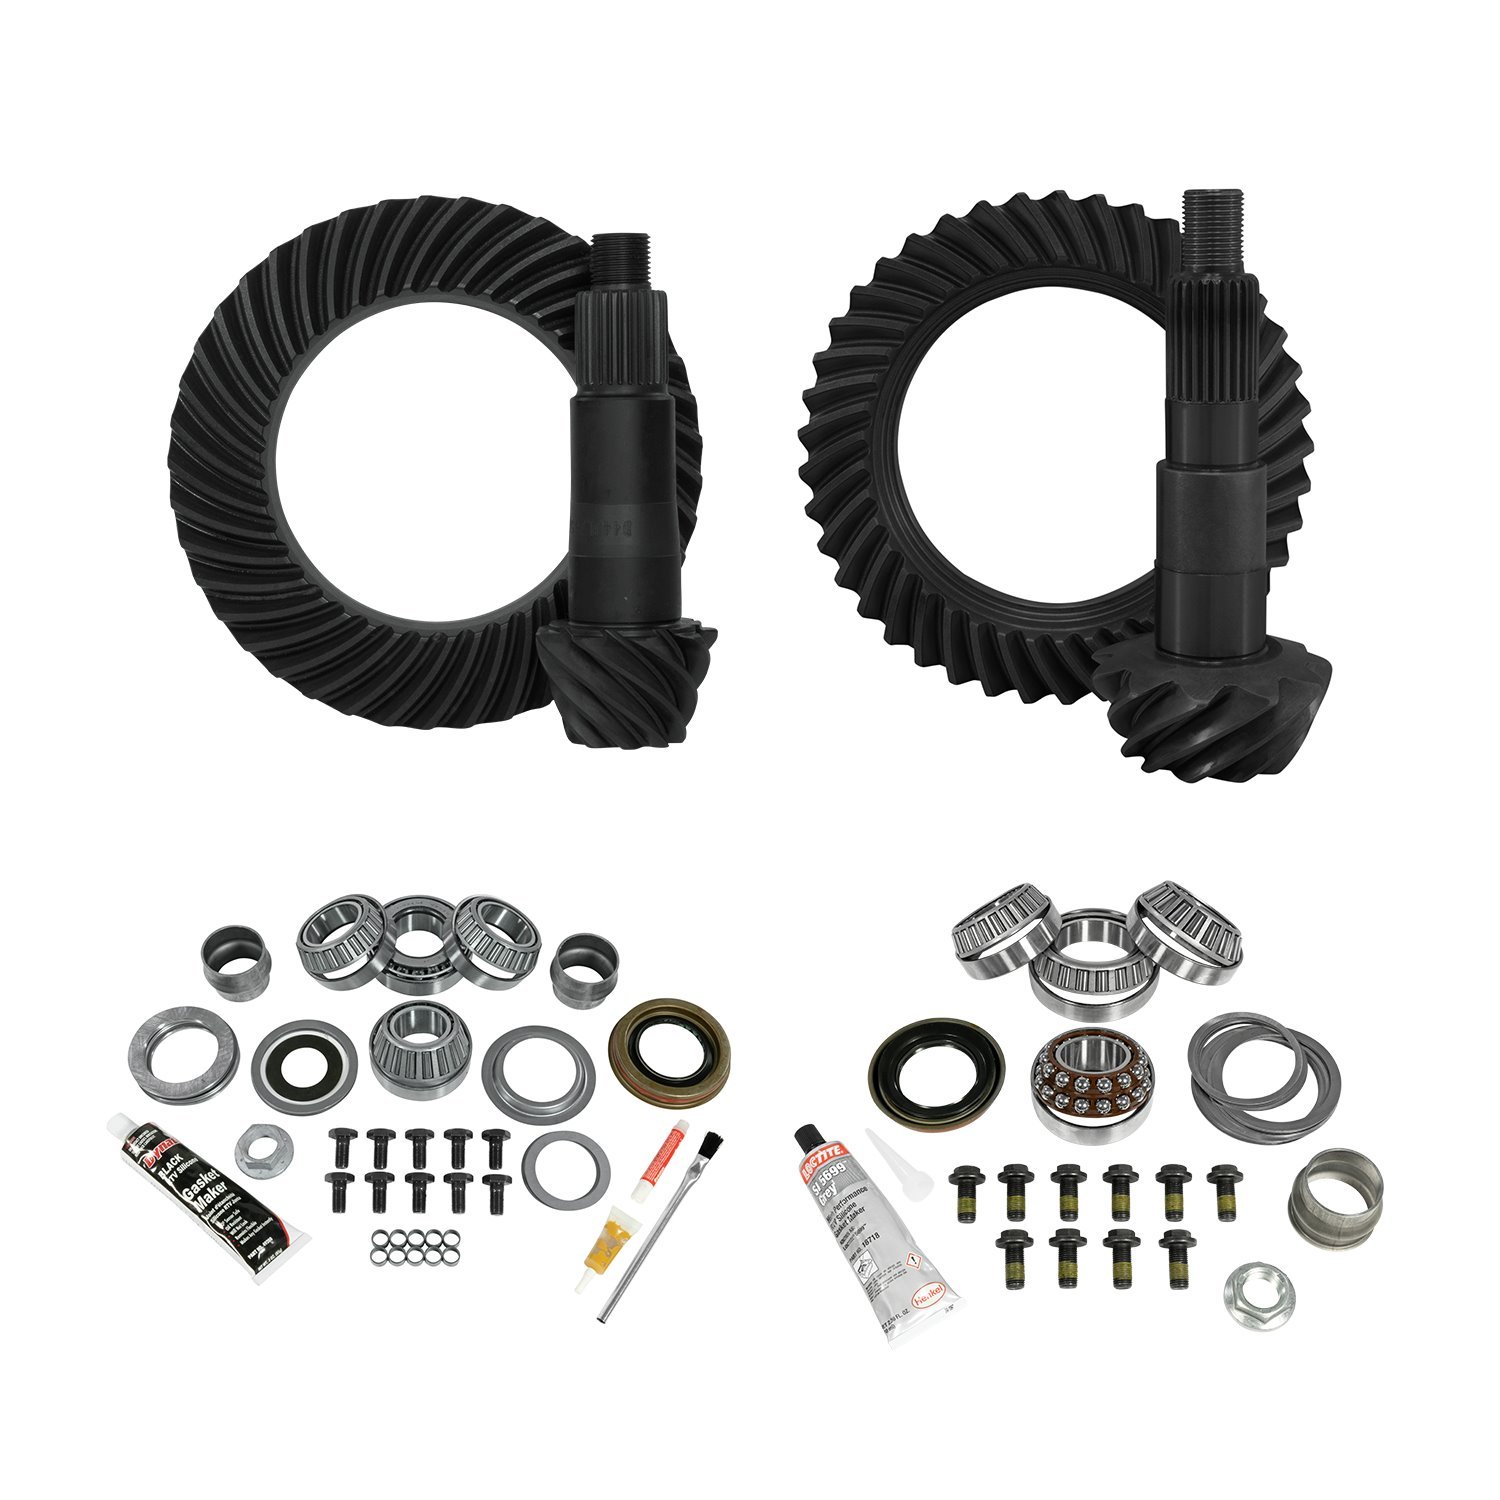 Re-Gear And Install Kit, D30 Front/D44 Rear, Jeep Jl Non-Rubicon, 4.56